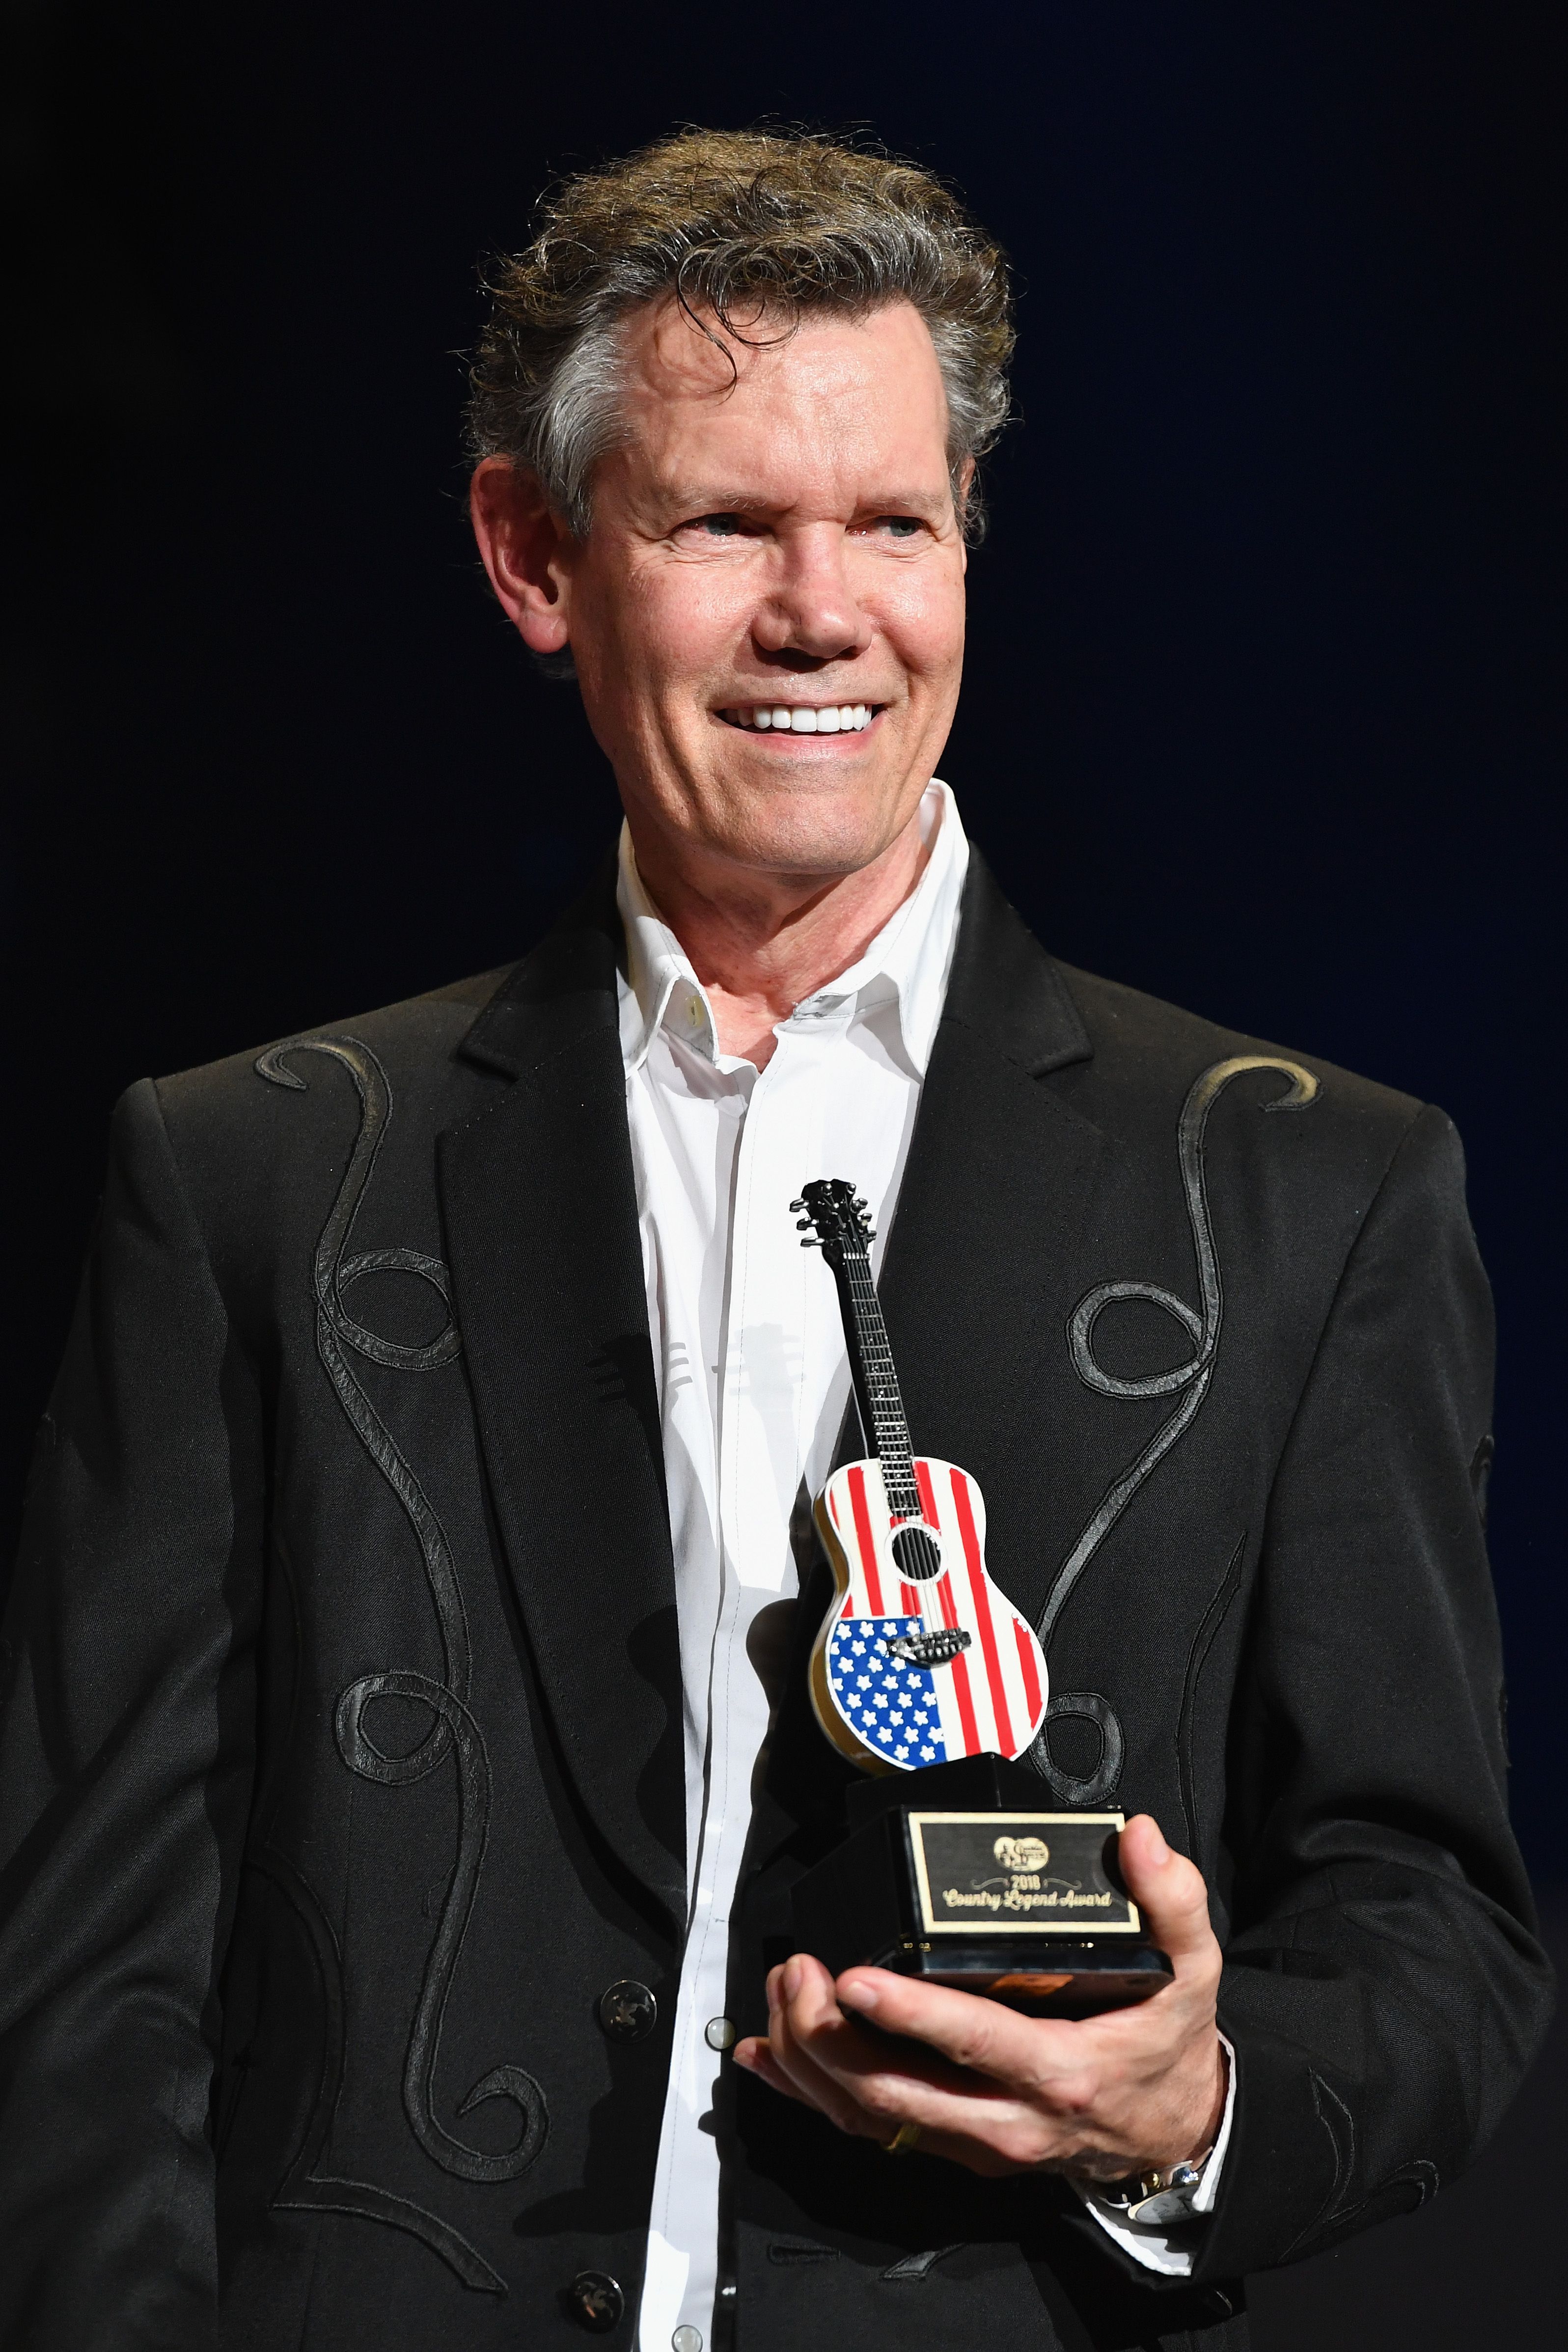 Randy Travis receives an award during the CMA Music Festival on June 9, 2018, in Nashville | Photo: Erika Goldring/Getty Images